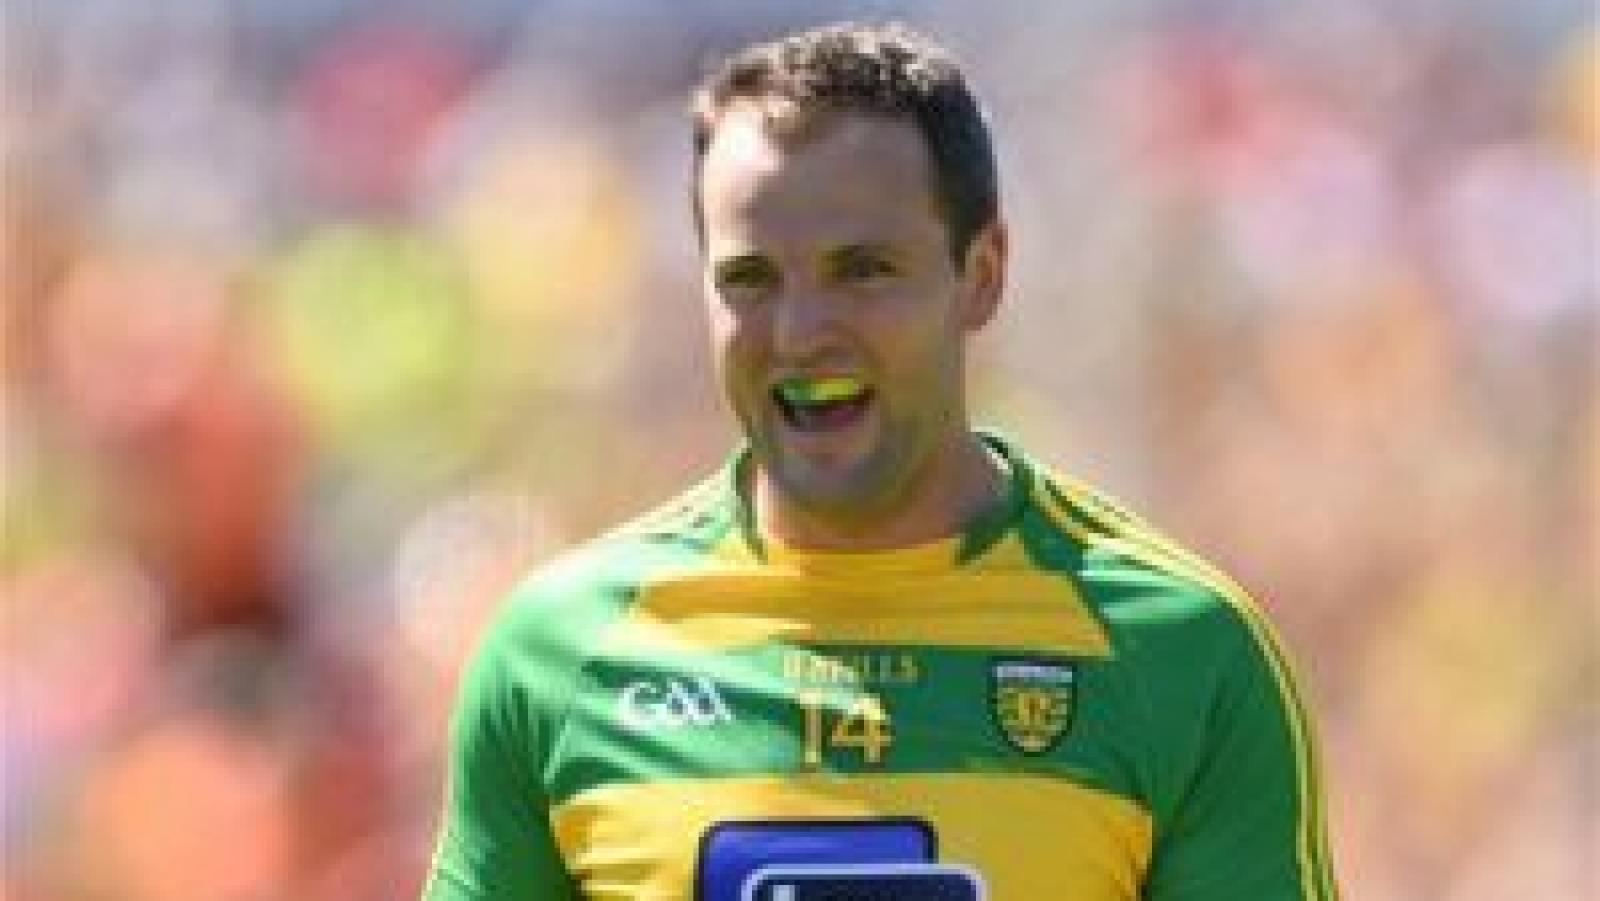 Michael Murphy in his Donegal jersey